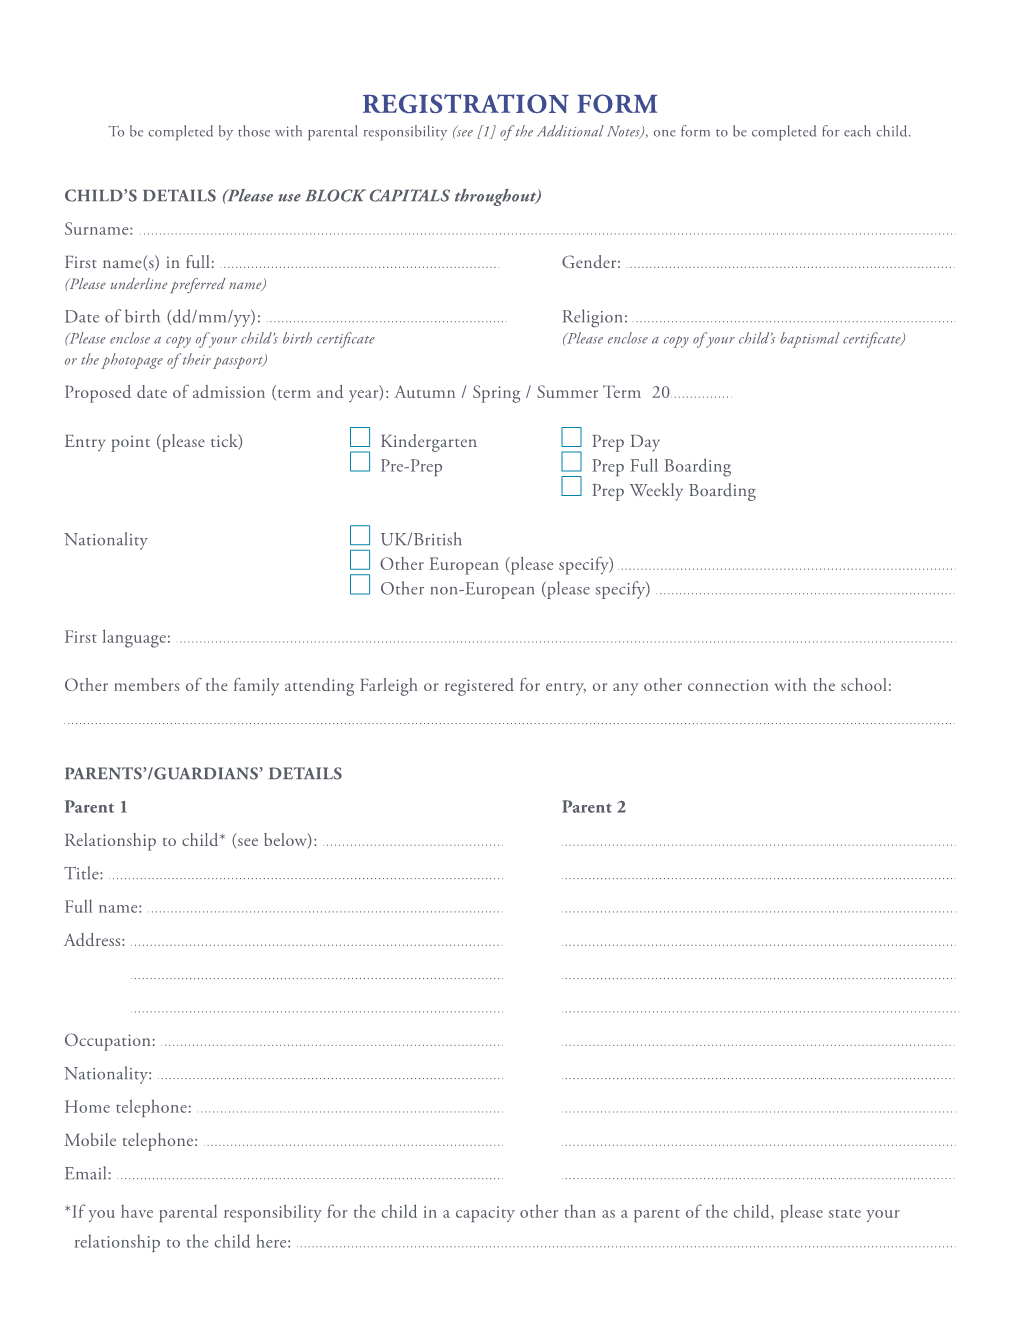 REGISTRATION FORM to Be Completed by Those with Parental Responsibility (See [1] of the Additional Notes), One Form to Be Completed for Each Child